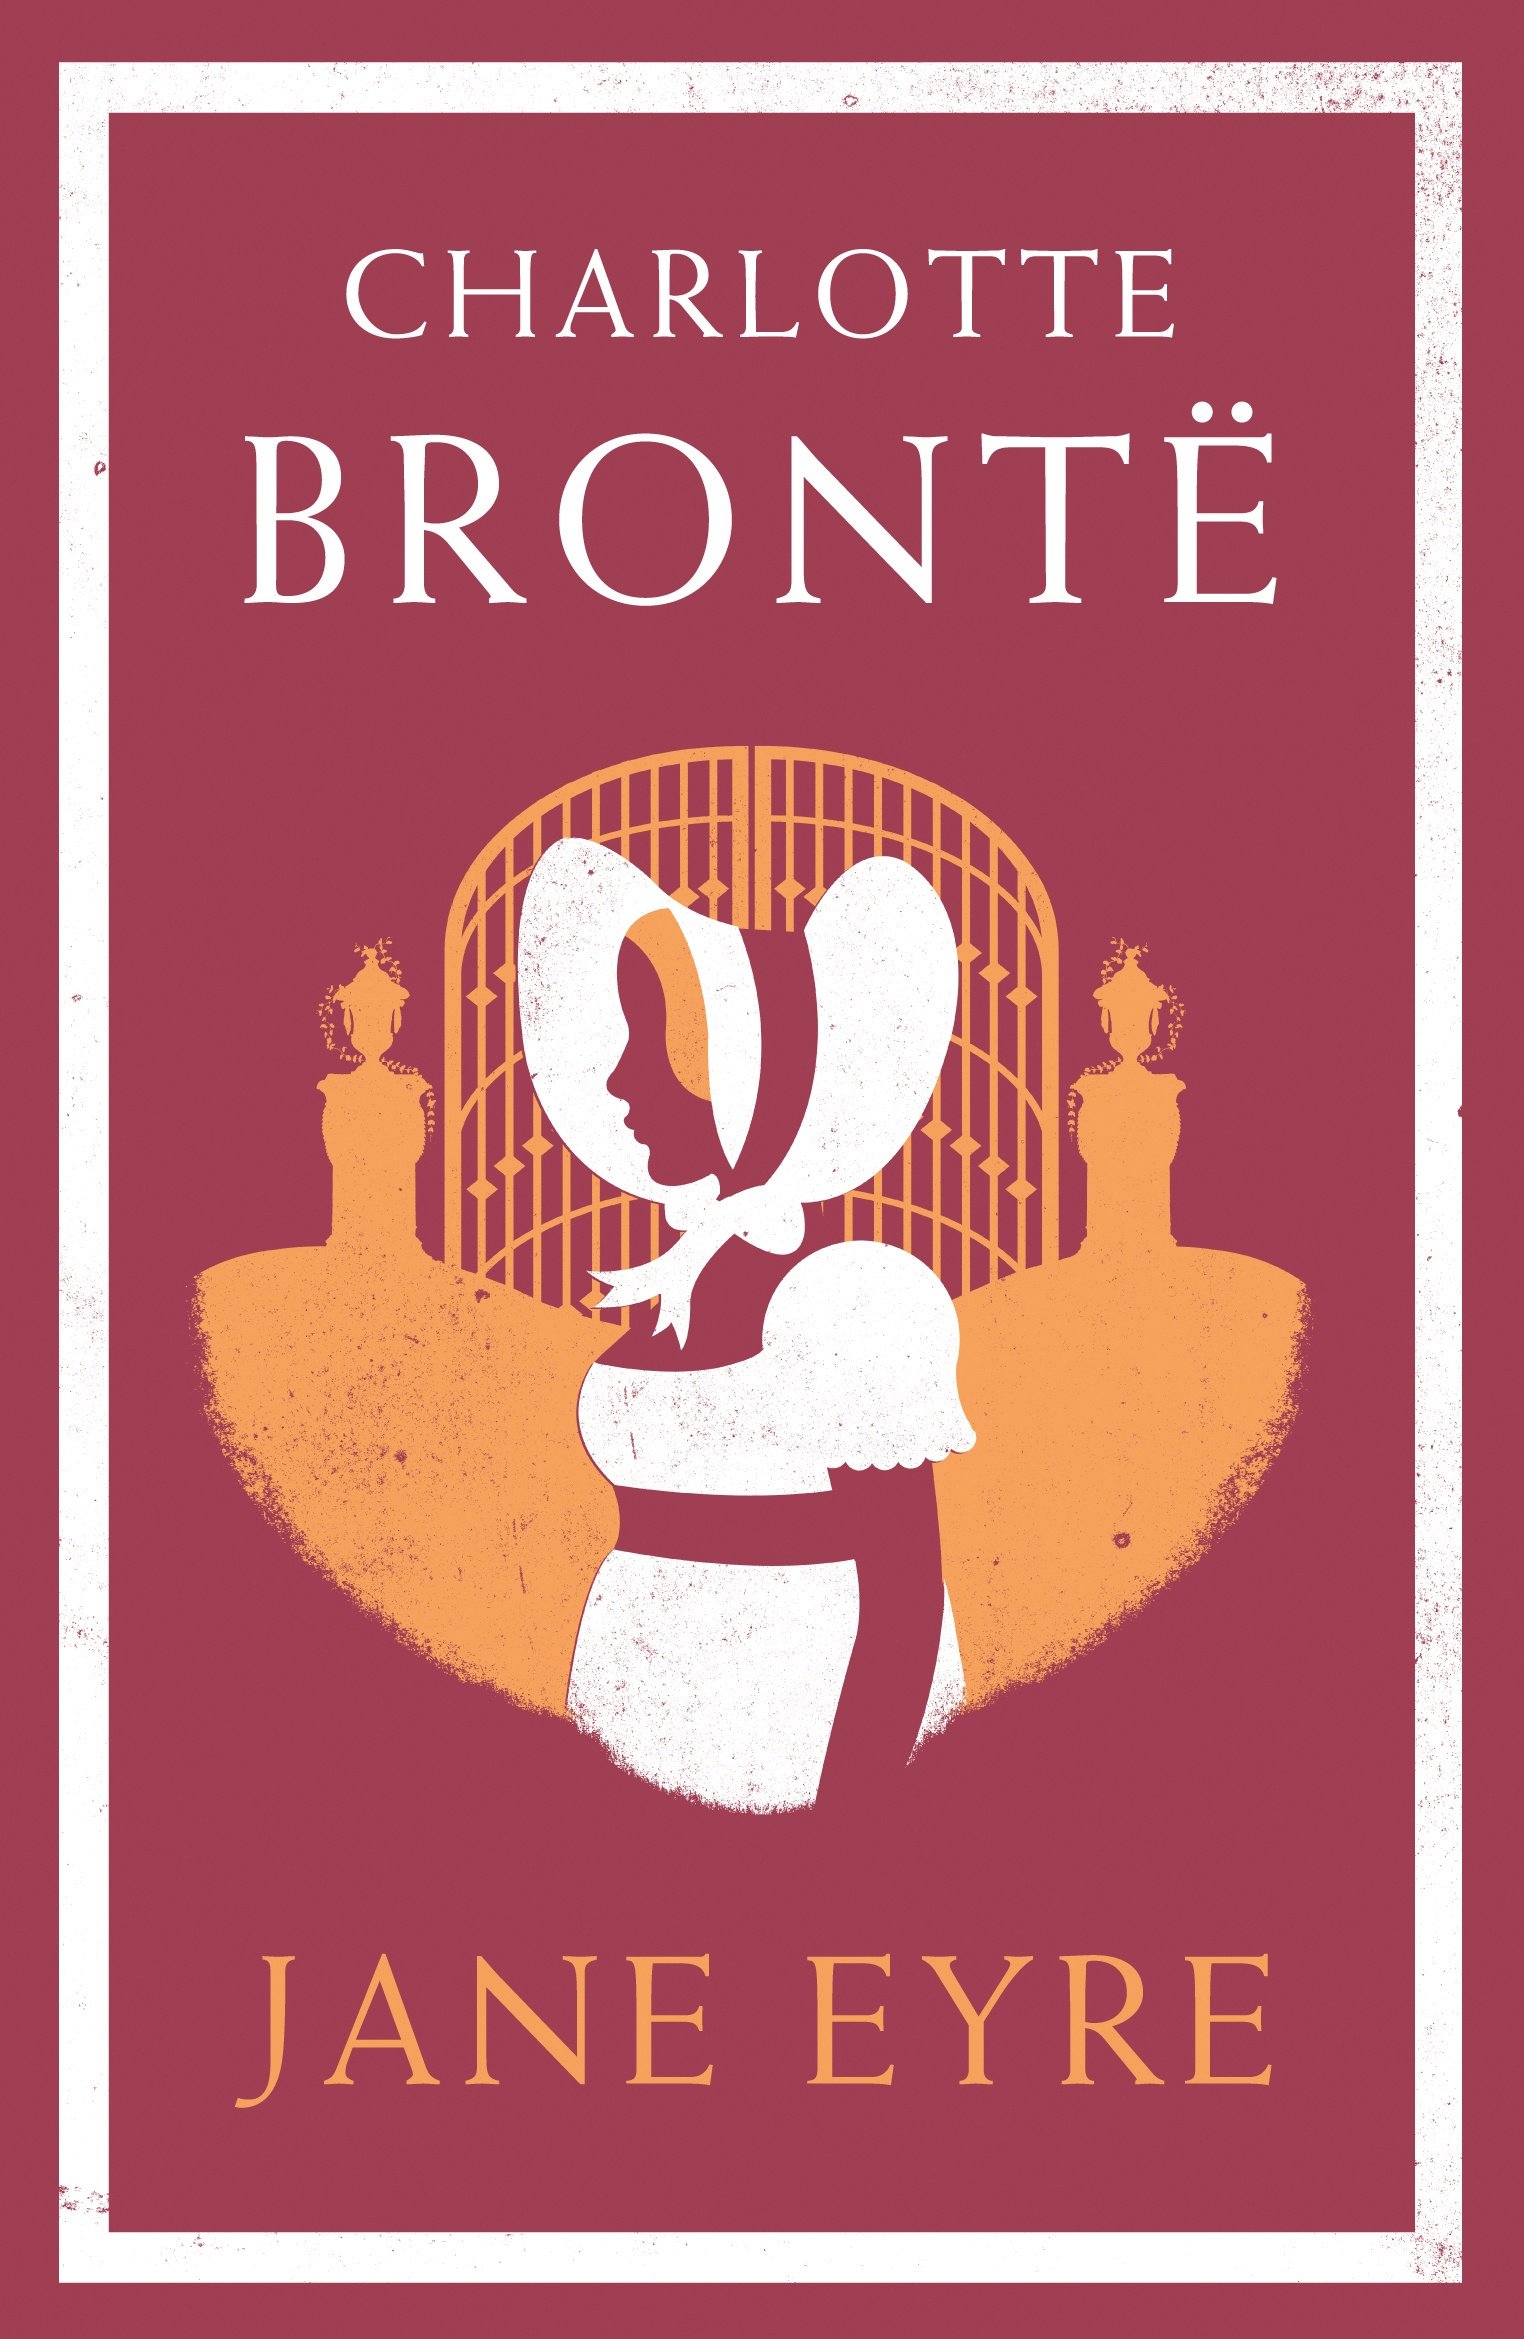 book review jane eyre charlotte bronte